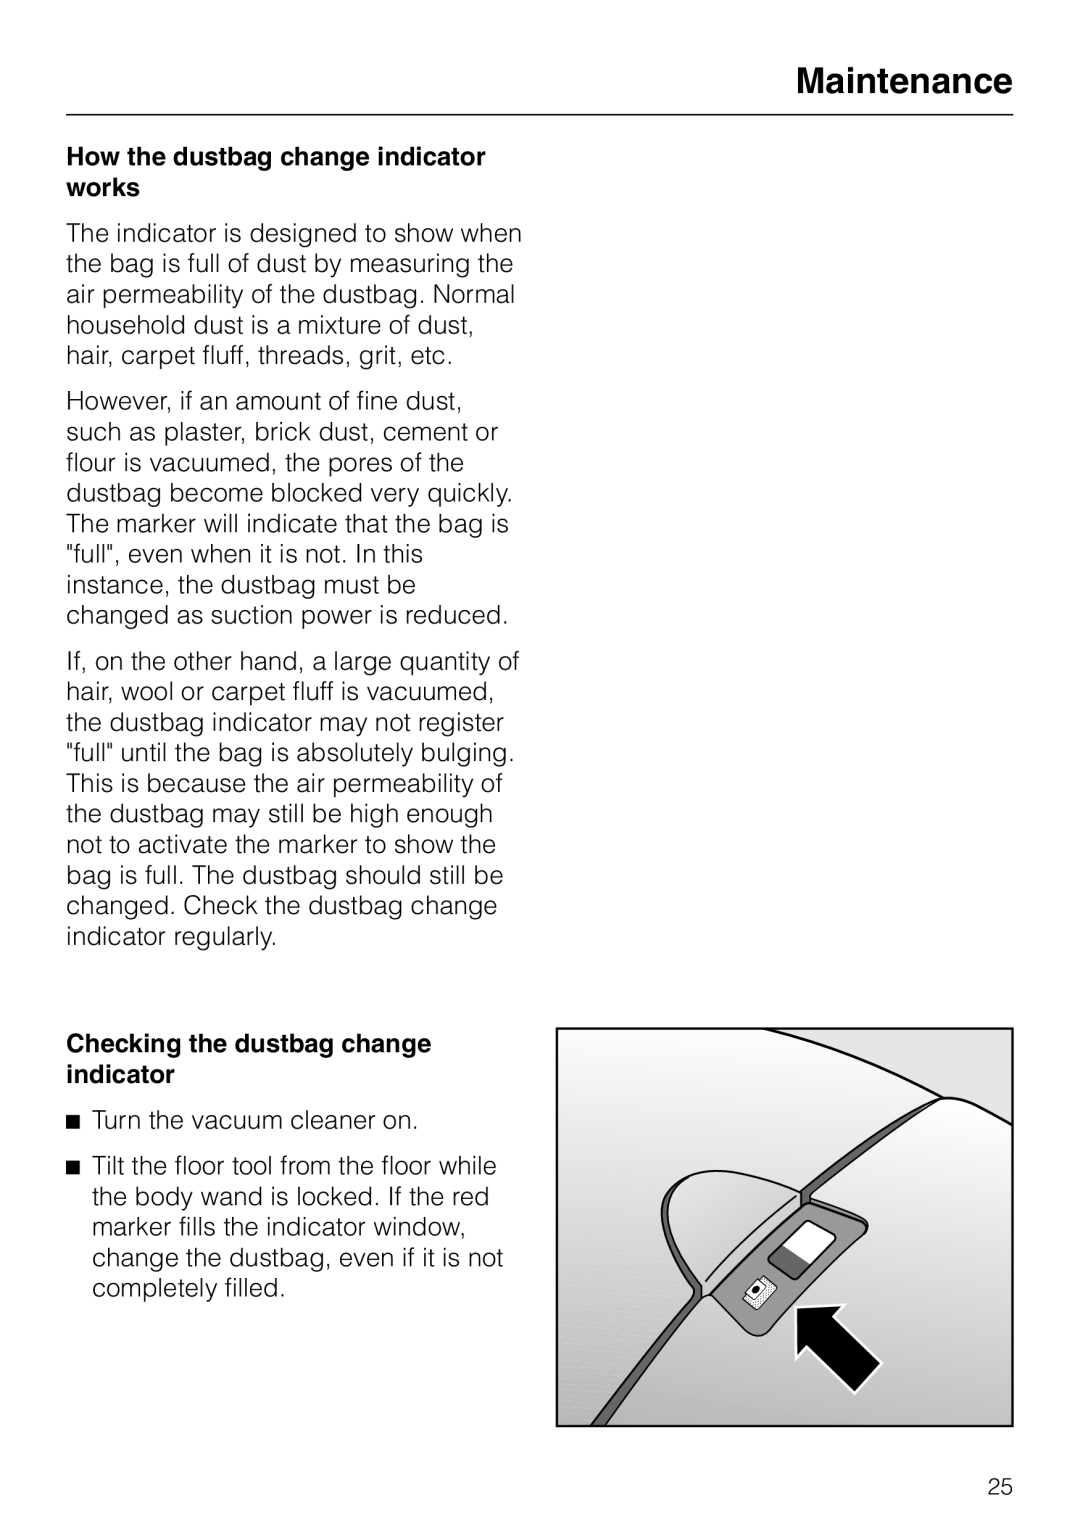 Miele HS09 How the dustbag change indicator works, Checking the dustbag change indicator, Maintenance 